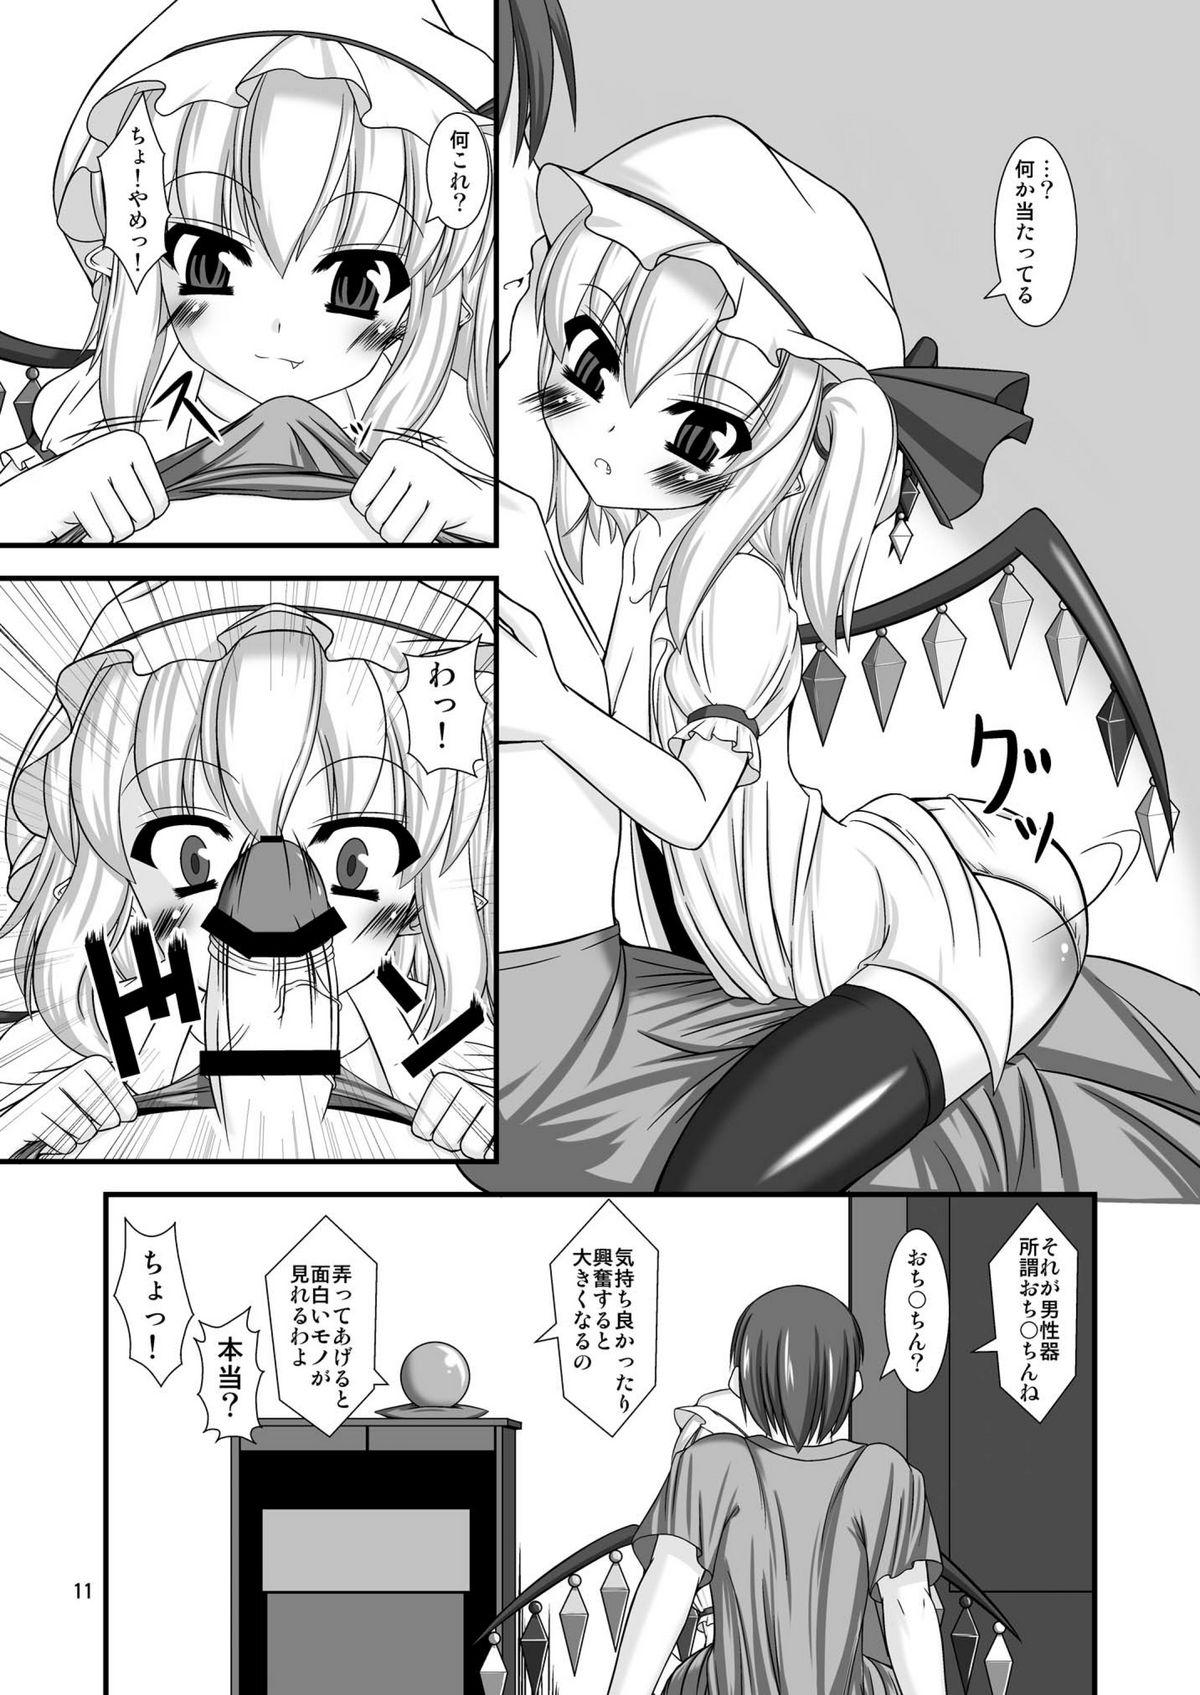 Wives Touhou do-M Hoihoi - Touhou project Groping - Page 11